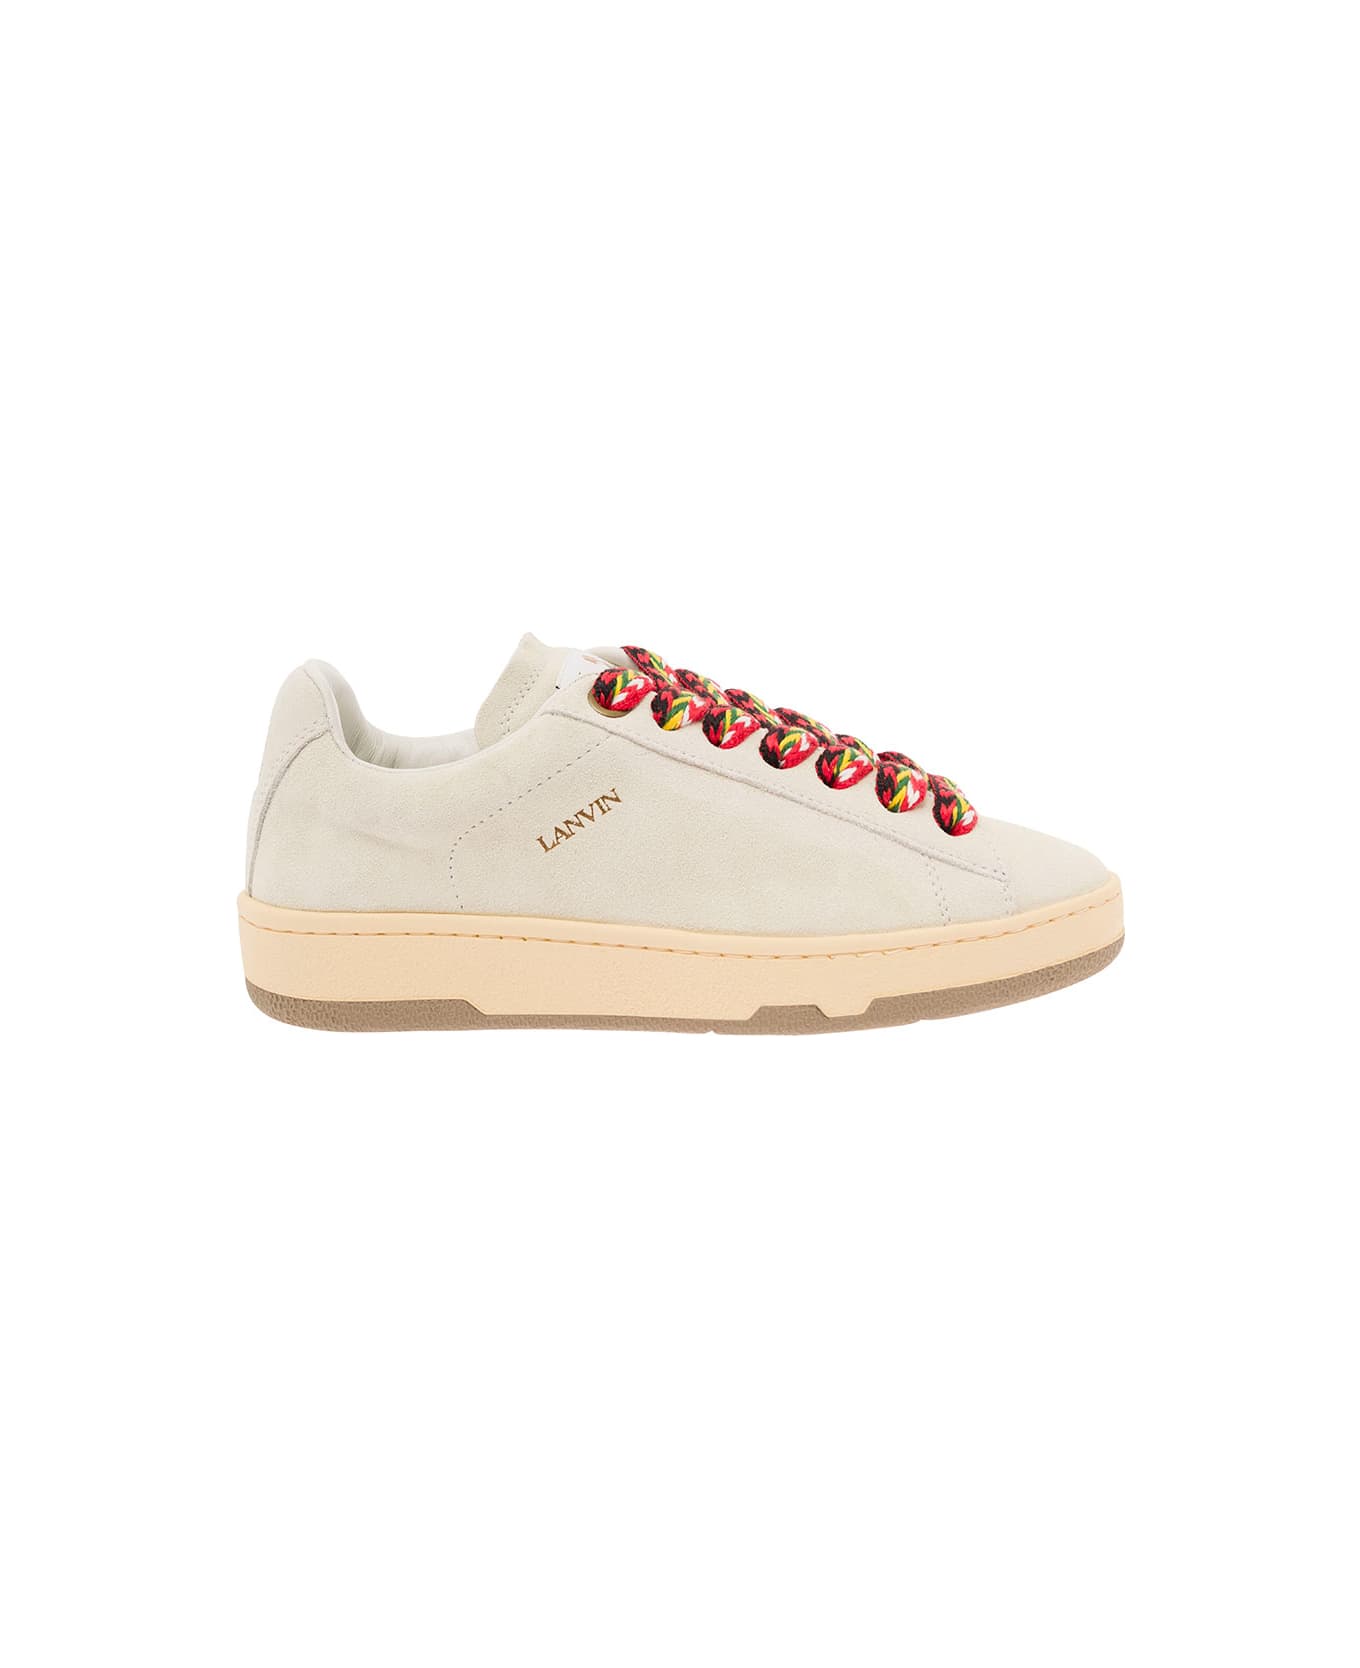 Lanvin 'lite Curb' White Low Top Sneakers With Oversized Multicolor Laces In Leather Woman - White